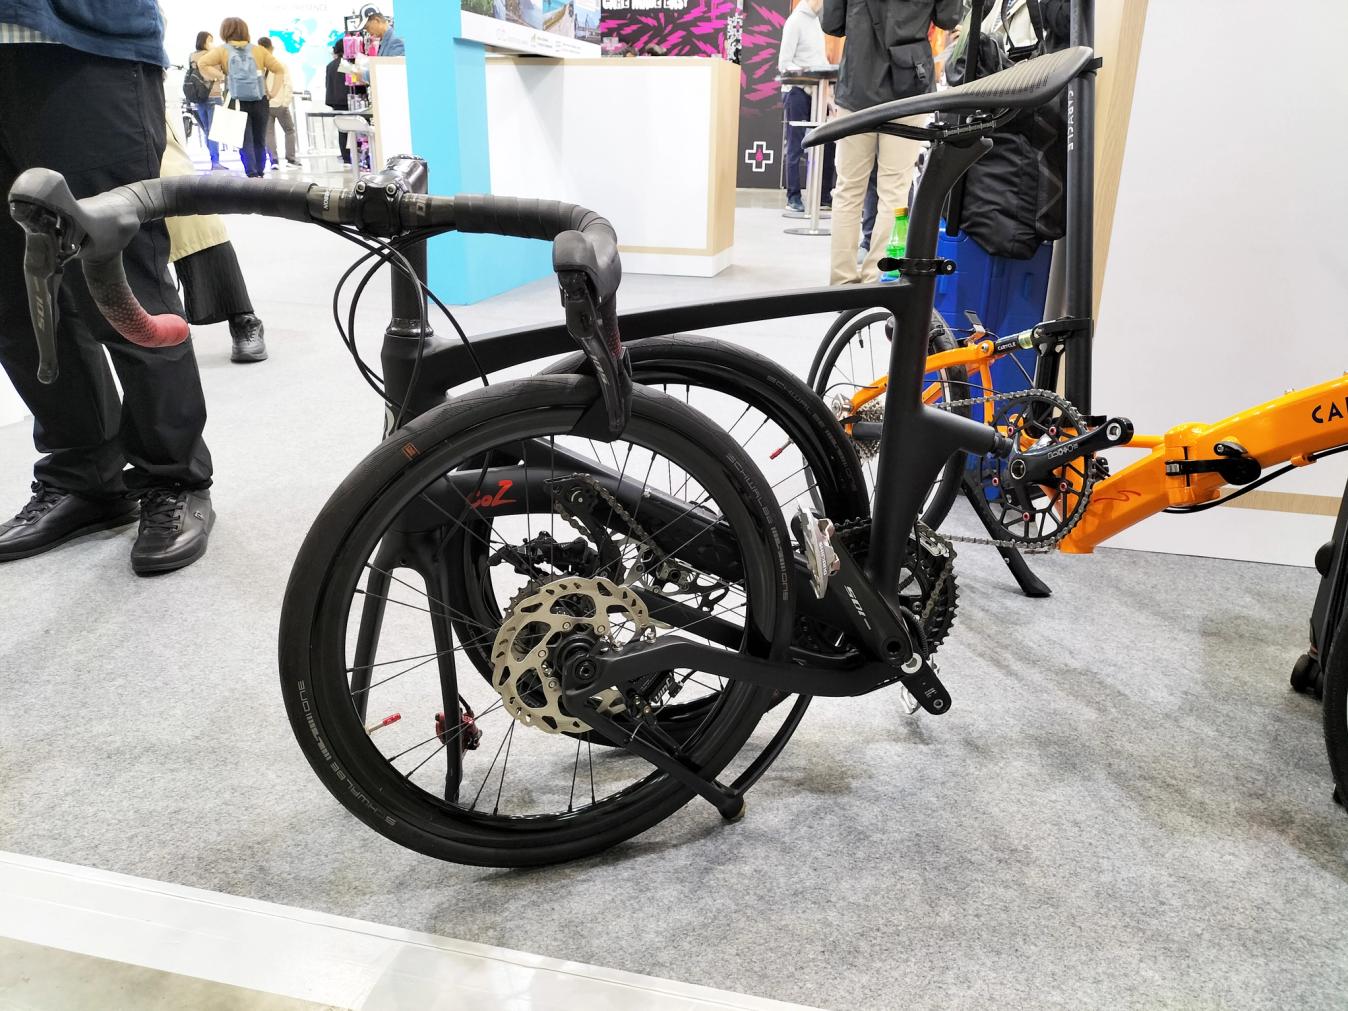 So far, so ordinary. Step in the Caracle-Coz from Japanese company Tech One which has produced a folding road bike. The idea is to add extra practicality to the traditional road bike design, and the brand says that it can even fit in a suitcase